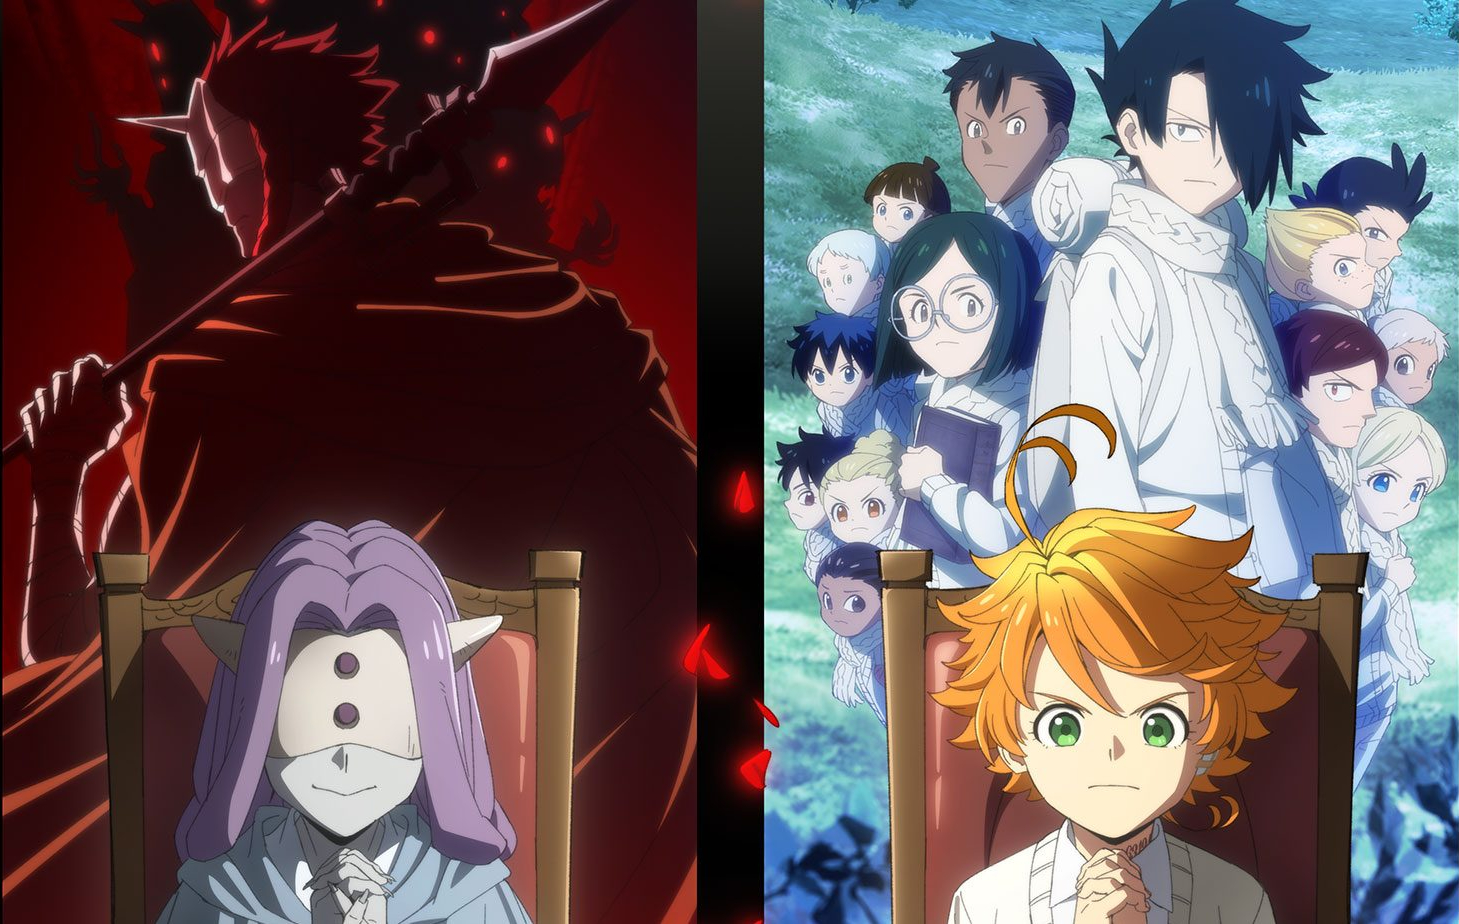 My Top 5 Favorite Scenes from The Promised Neverland - Episode 1